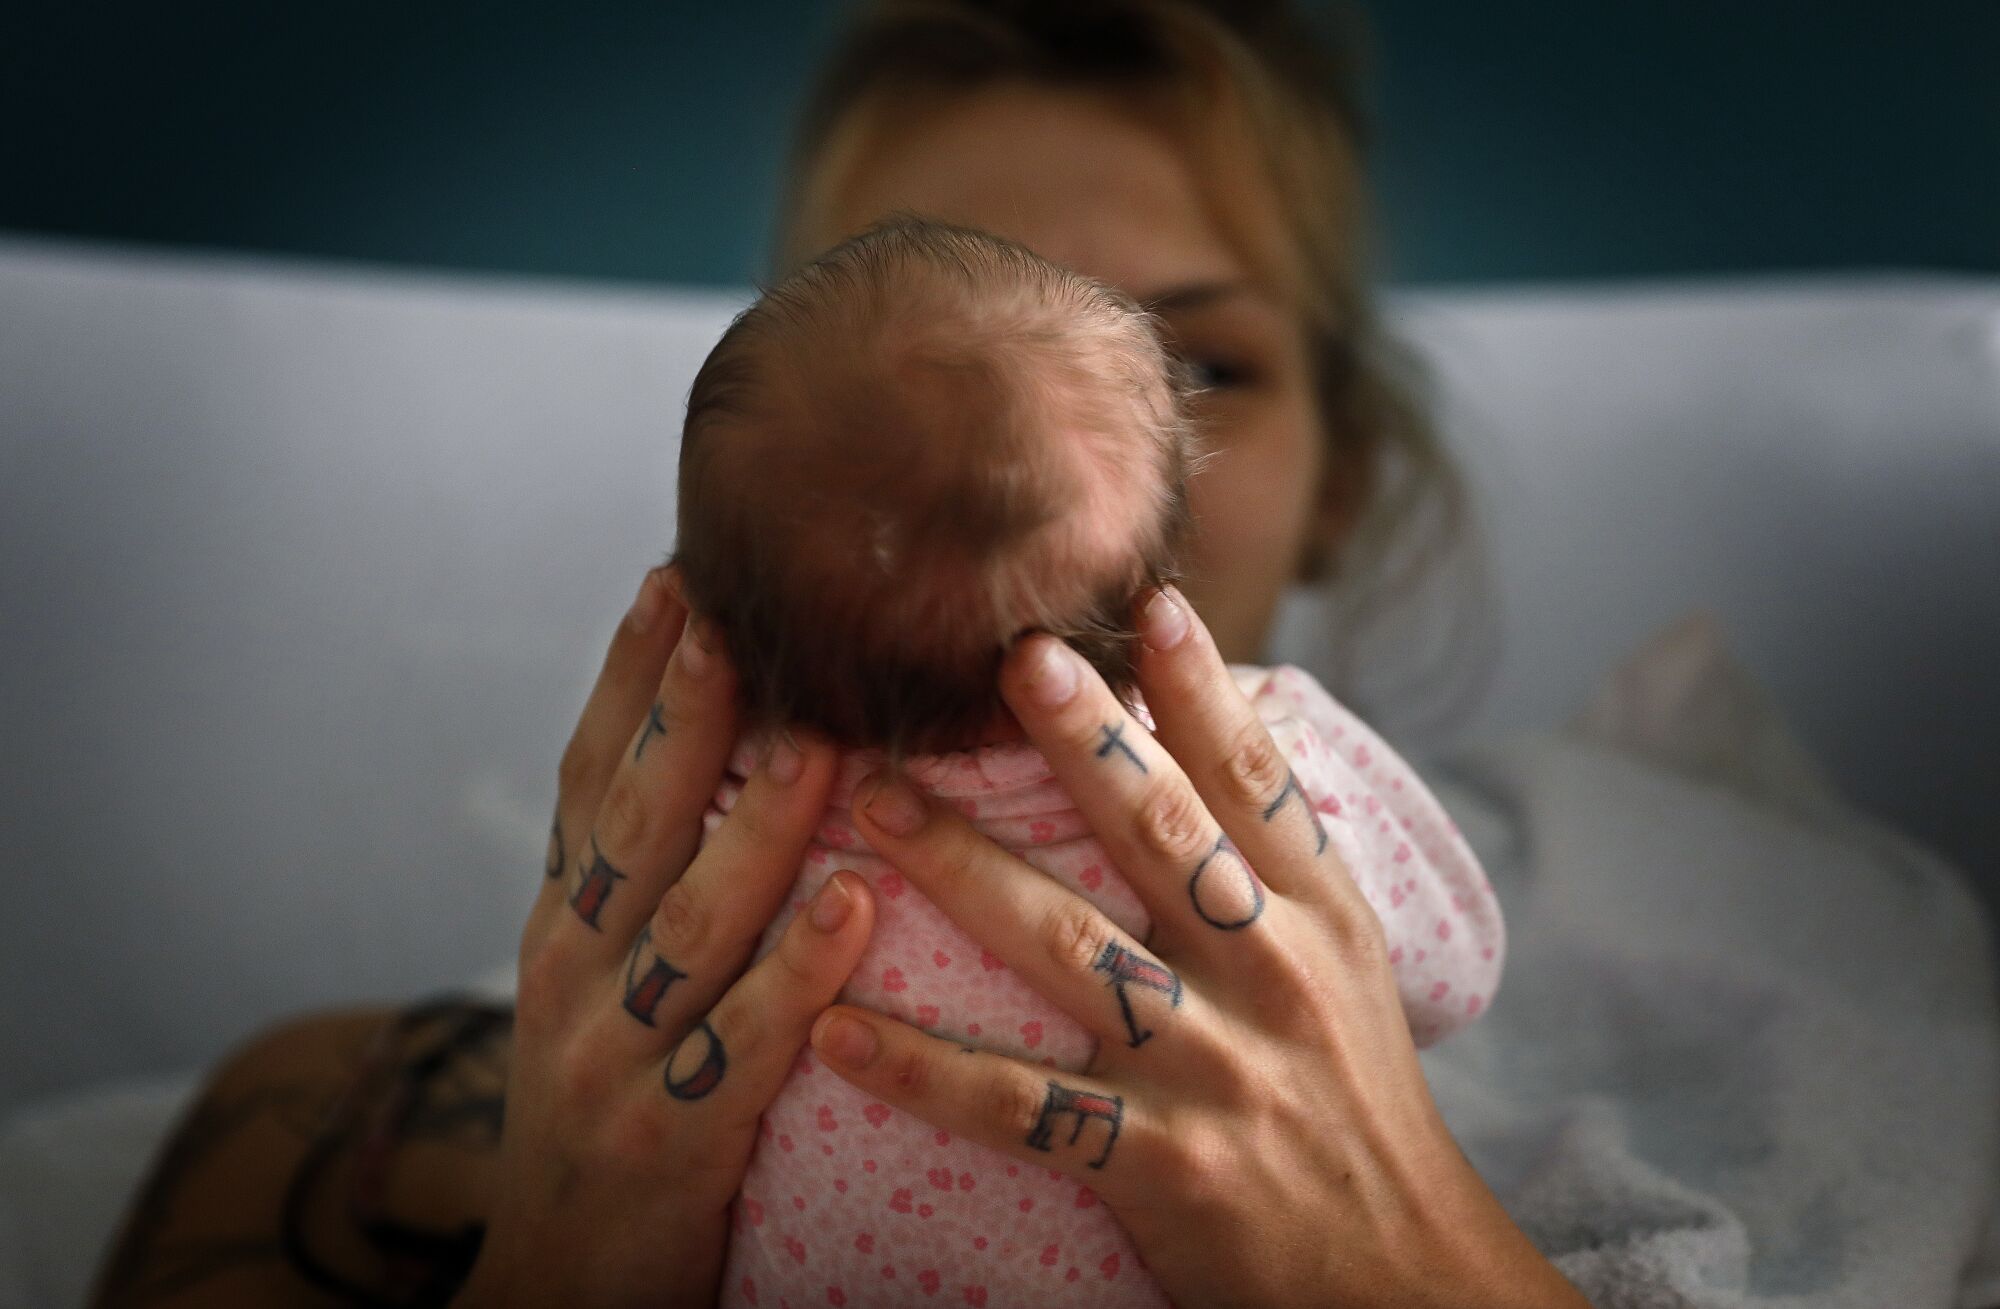 A woman with tattoos on her knuckles holding a baby as seen from behind the baby's head.